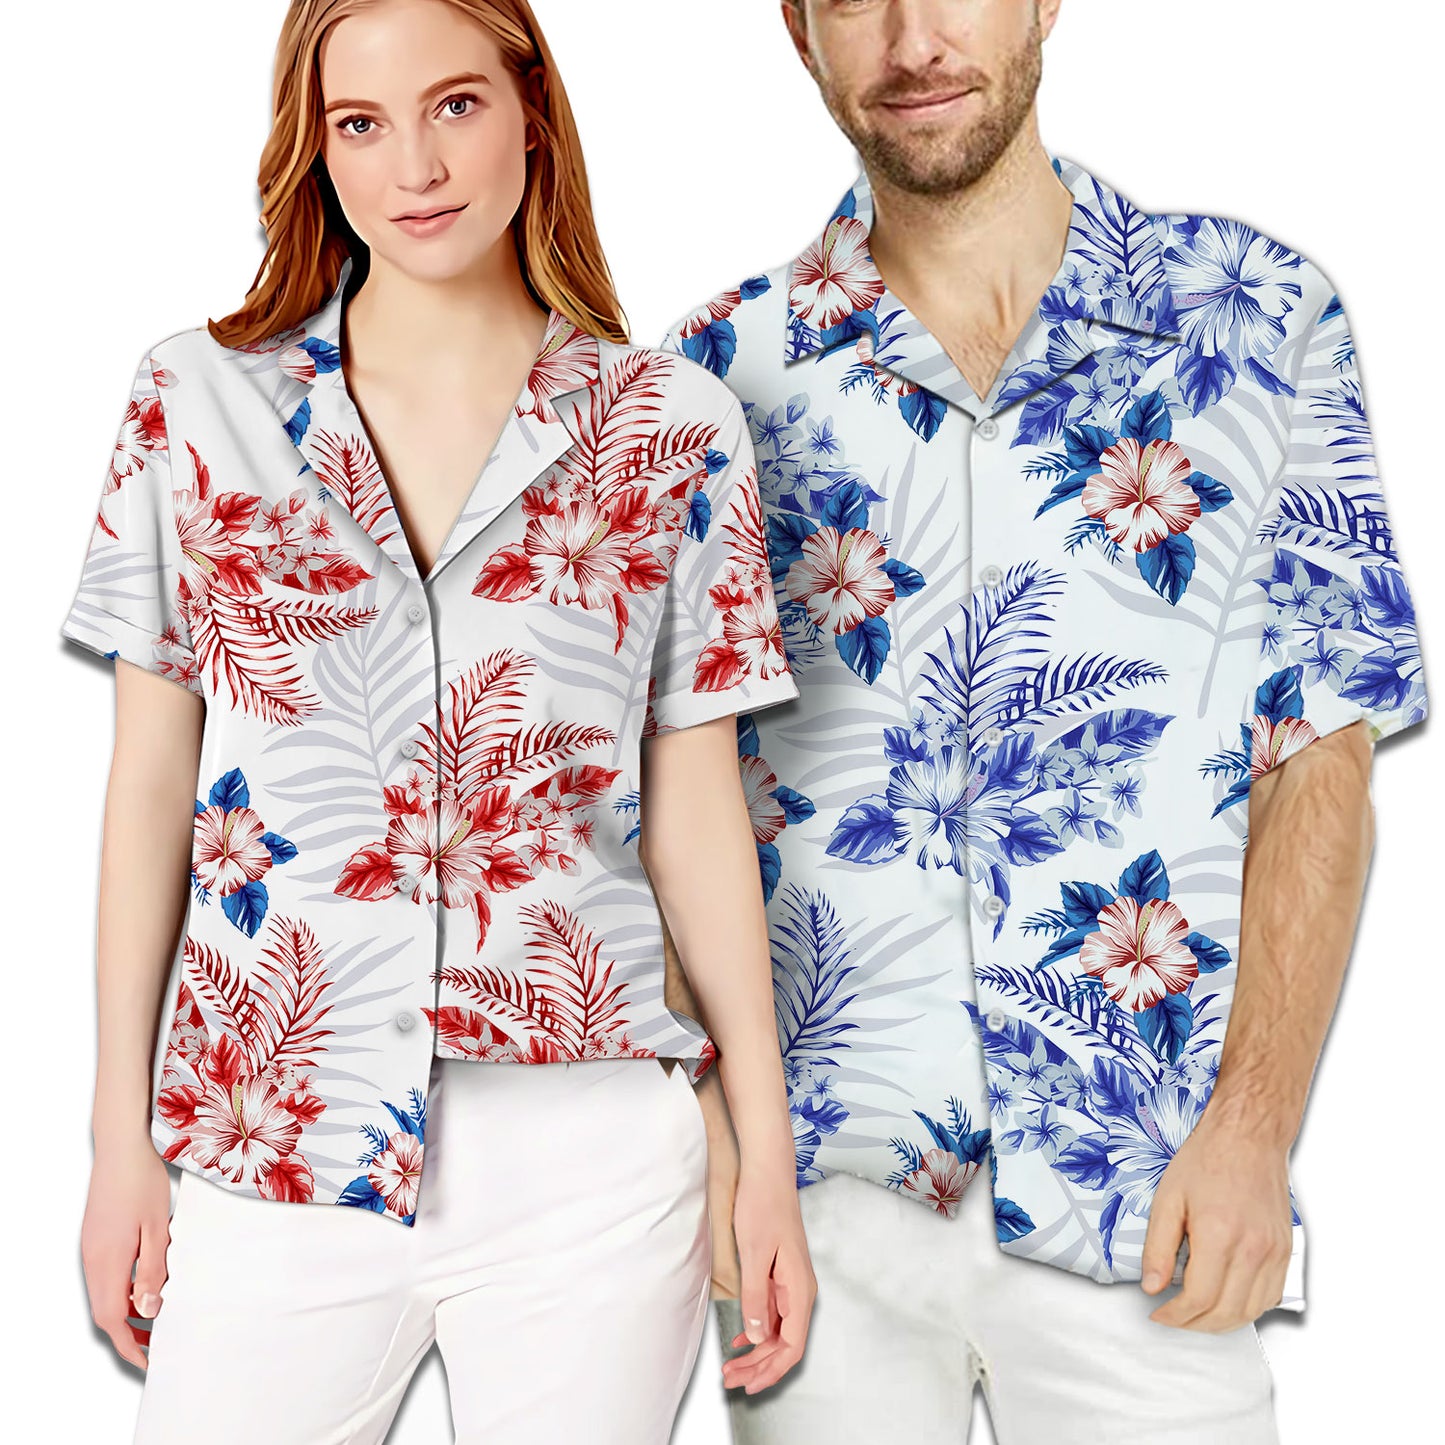 She Is His Heart He Is Her Armor Matching Hawaiian Shirt Personalizedwitch For Couple